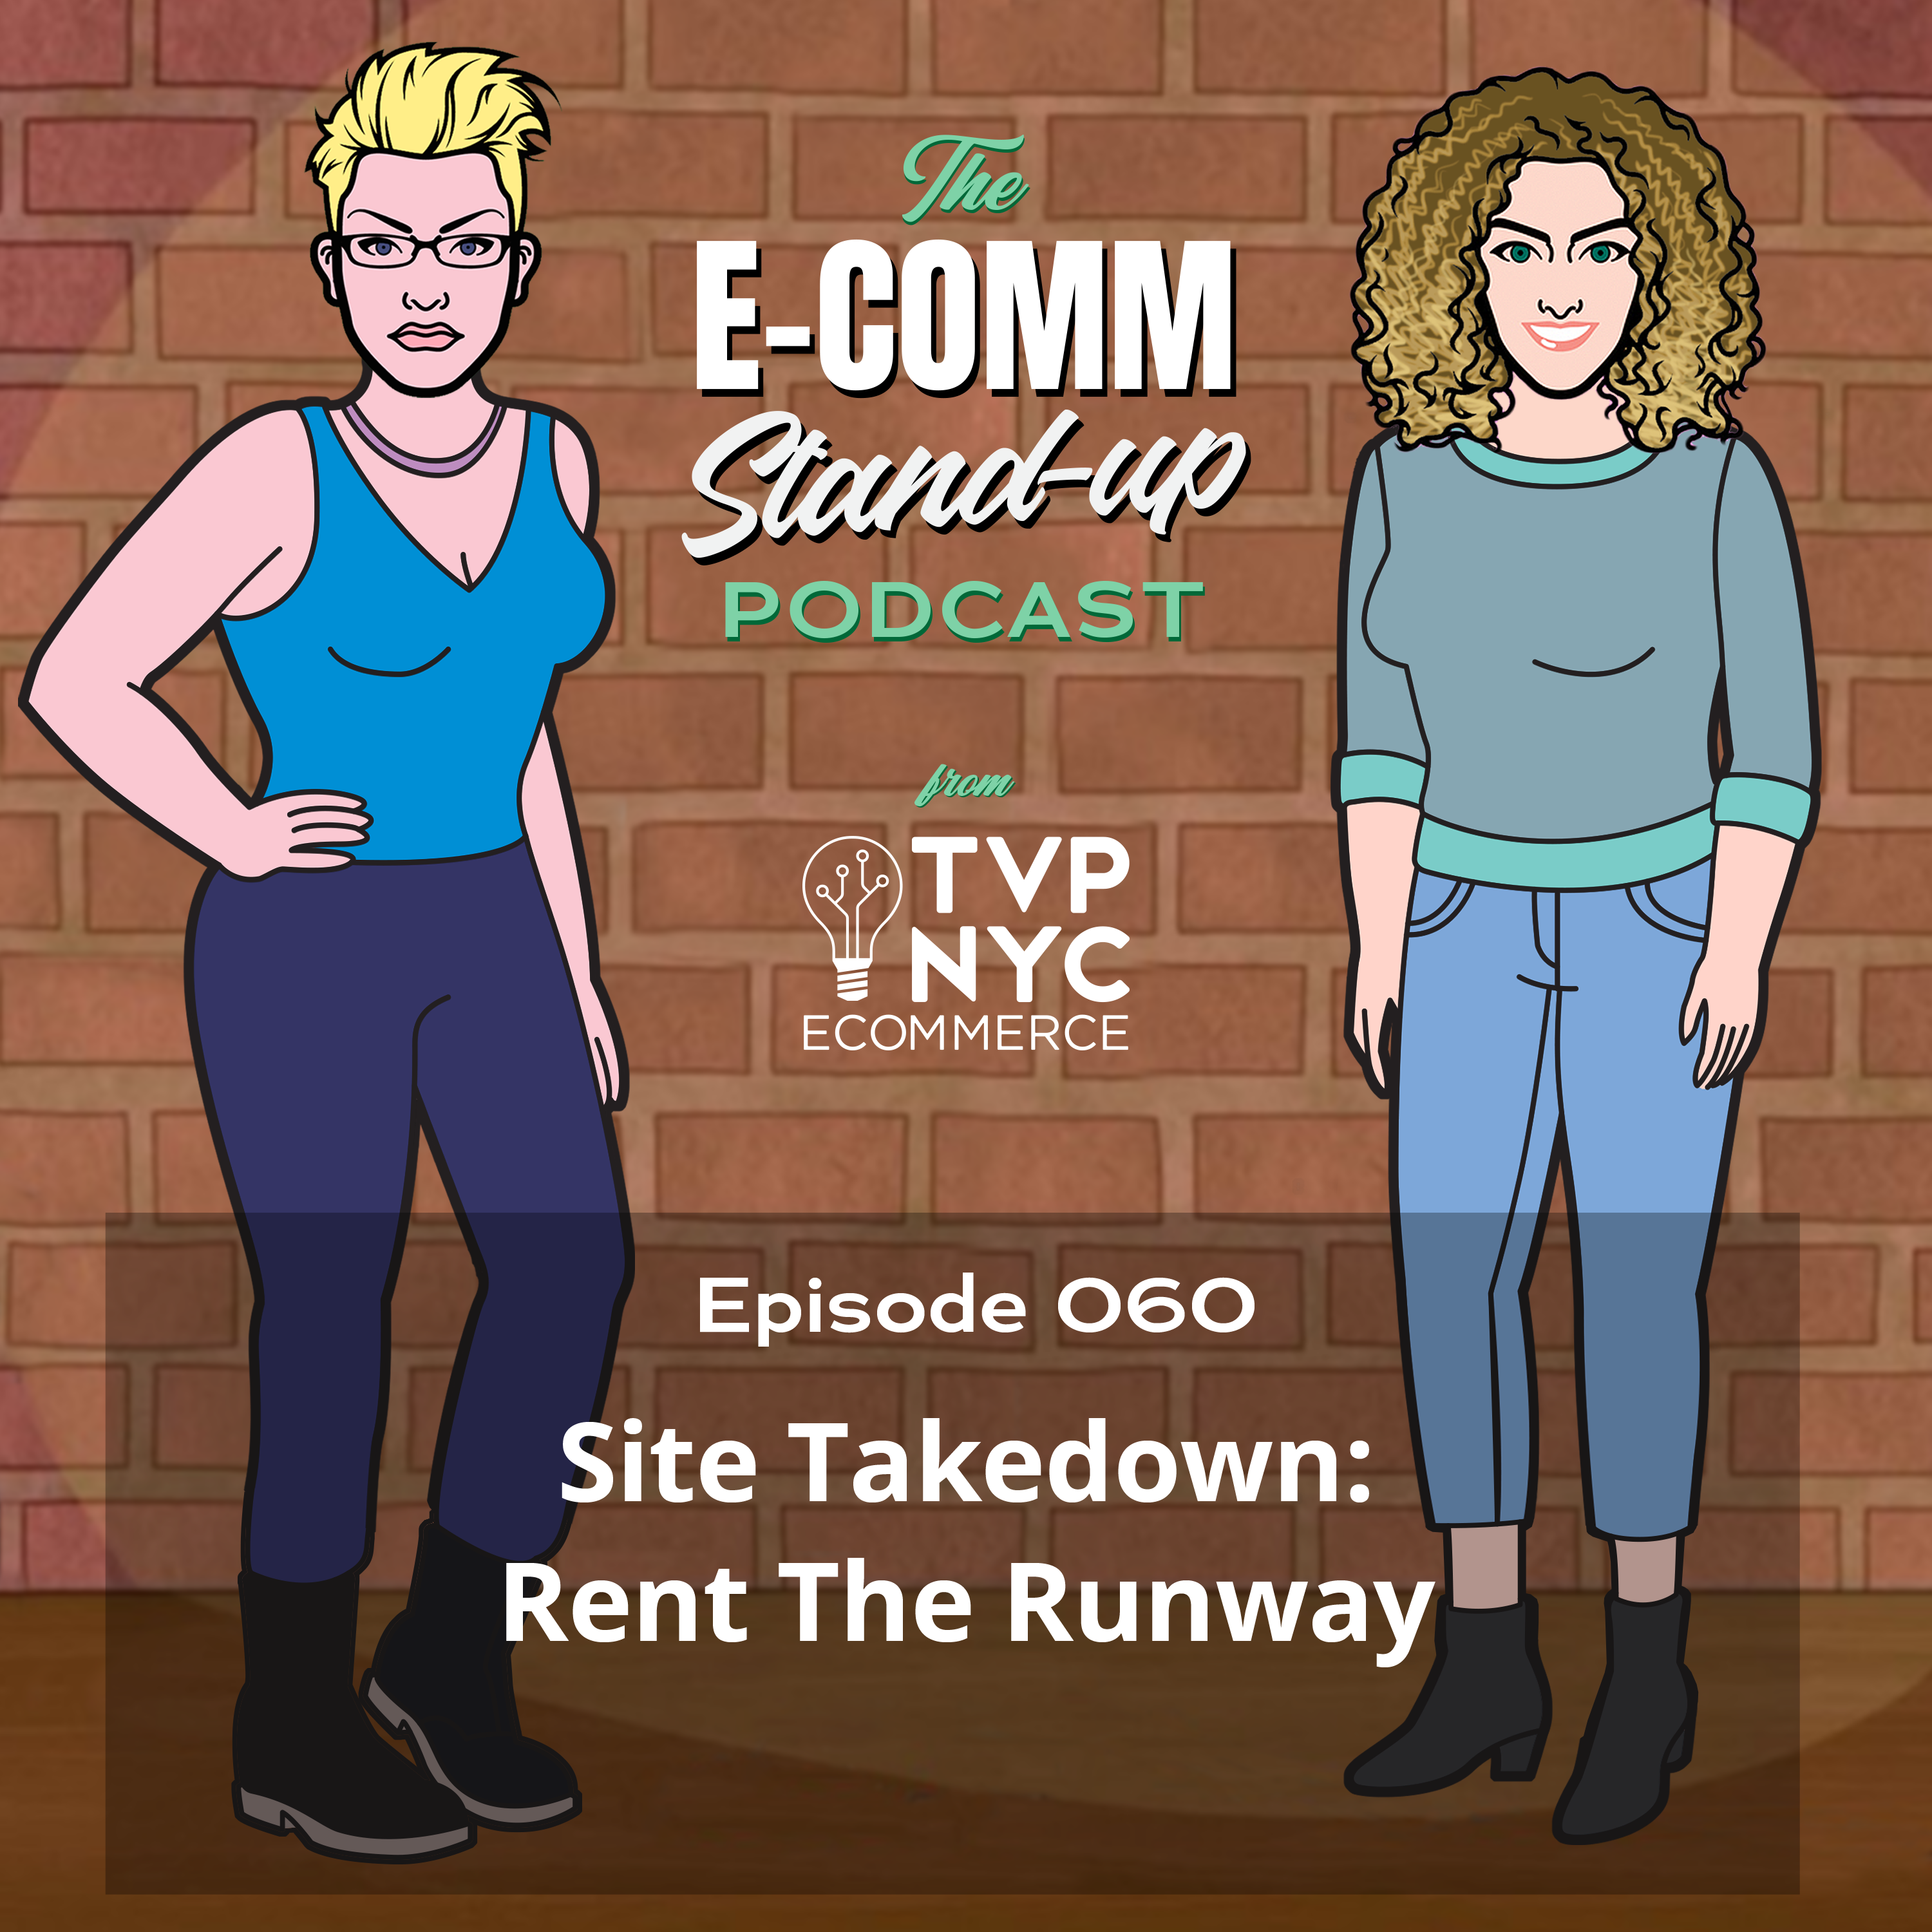 Site Takedown: Rent The Runway